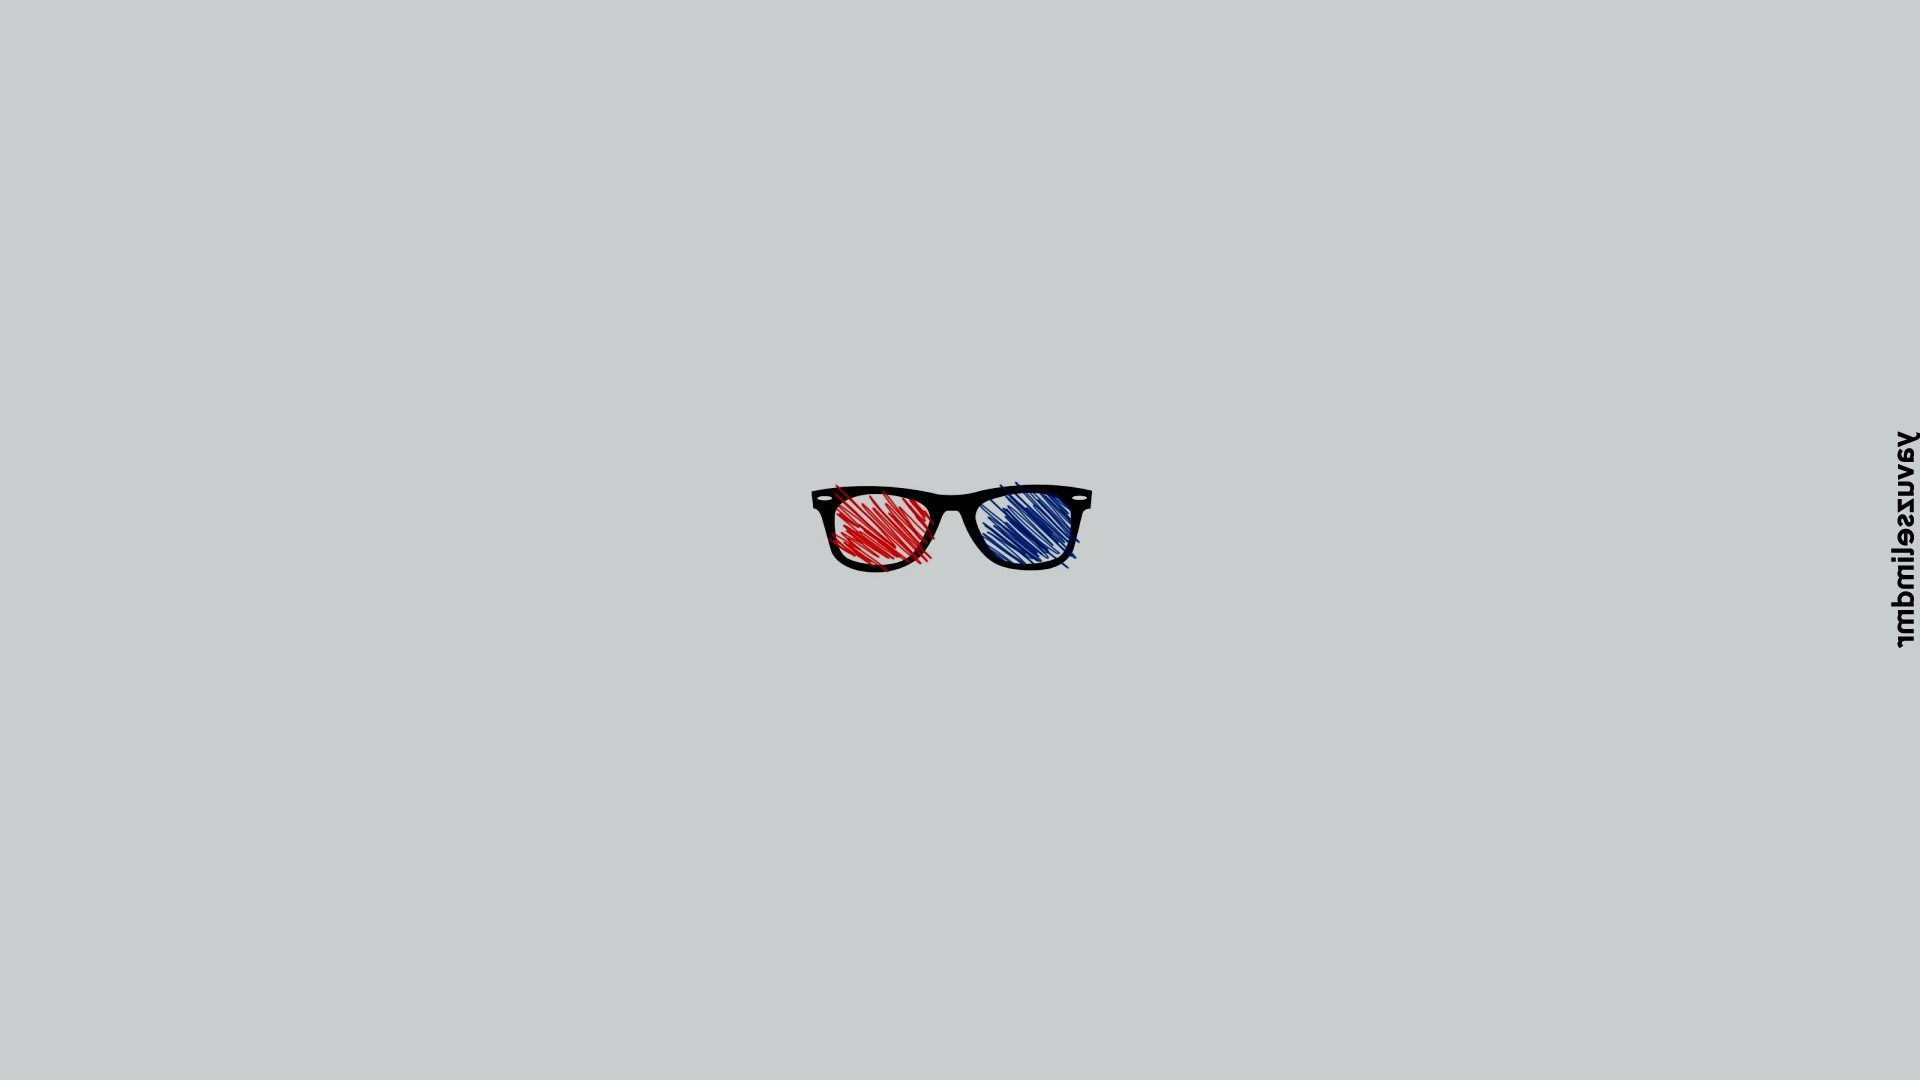 The glasses are red and blue - 3D glasses